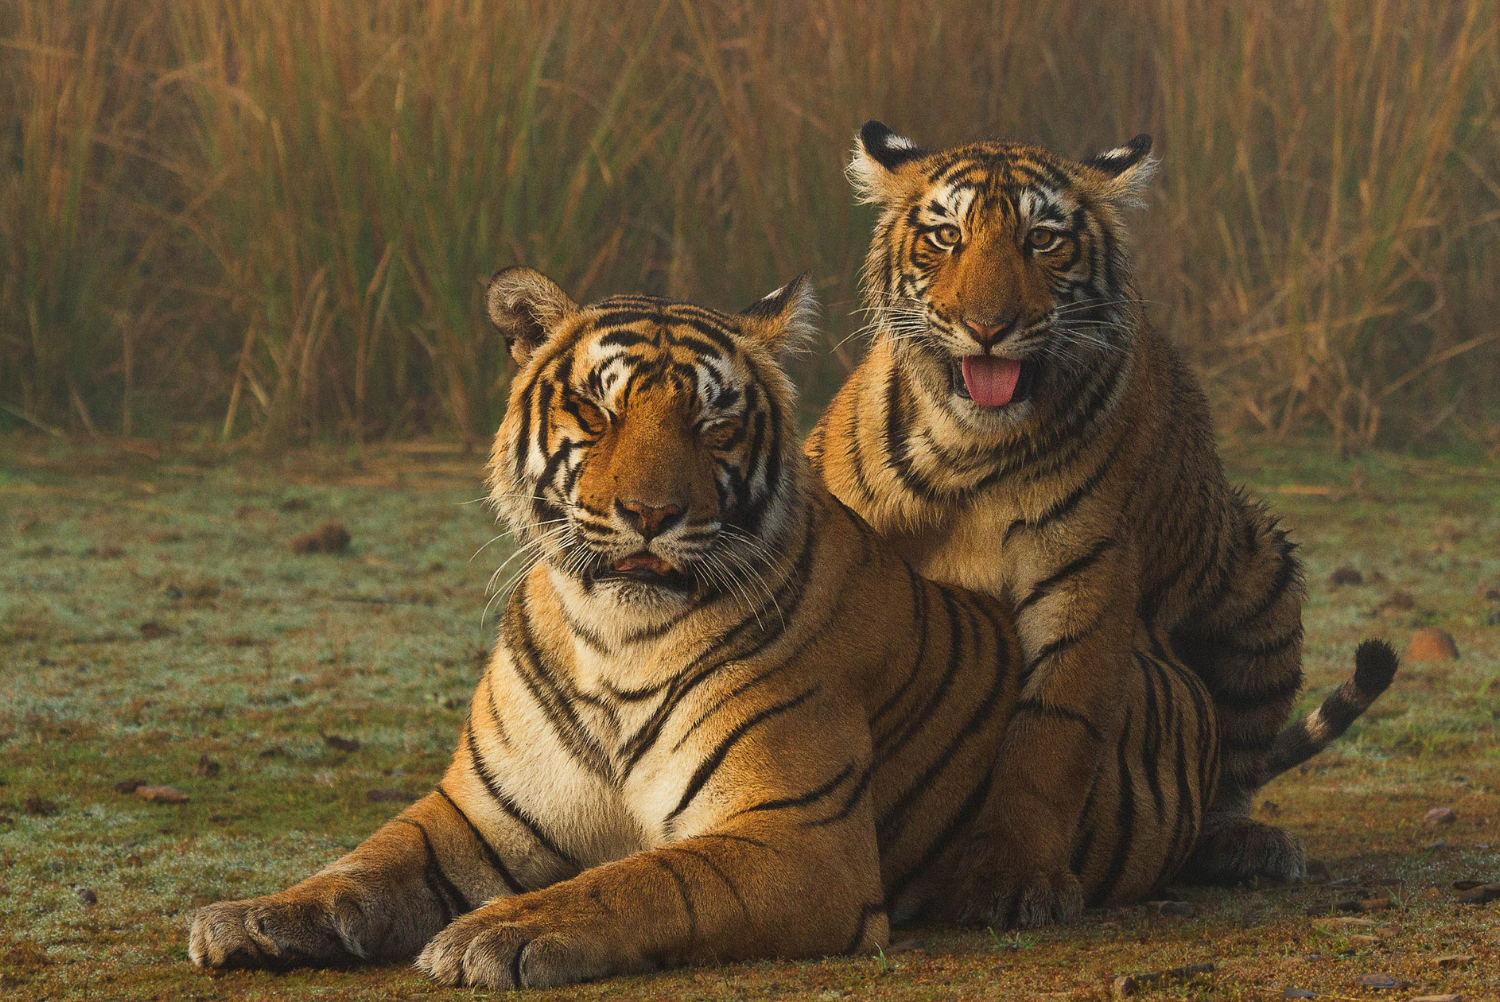 A mother tiger (Krishna, T-19) and her cub. Ranthambore National Park, India